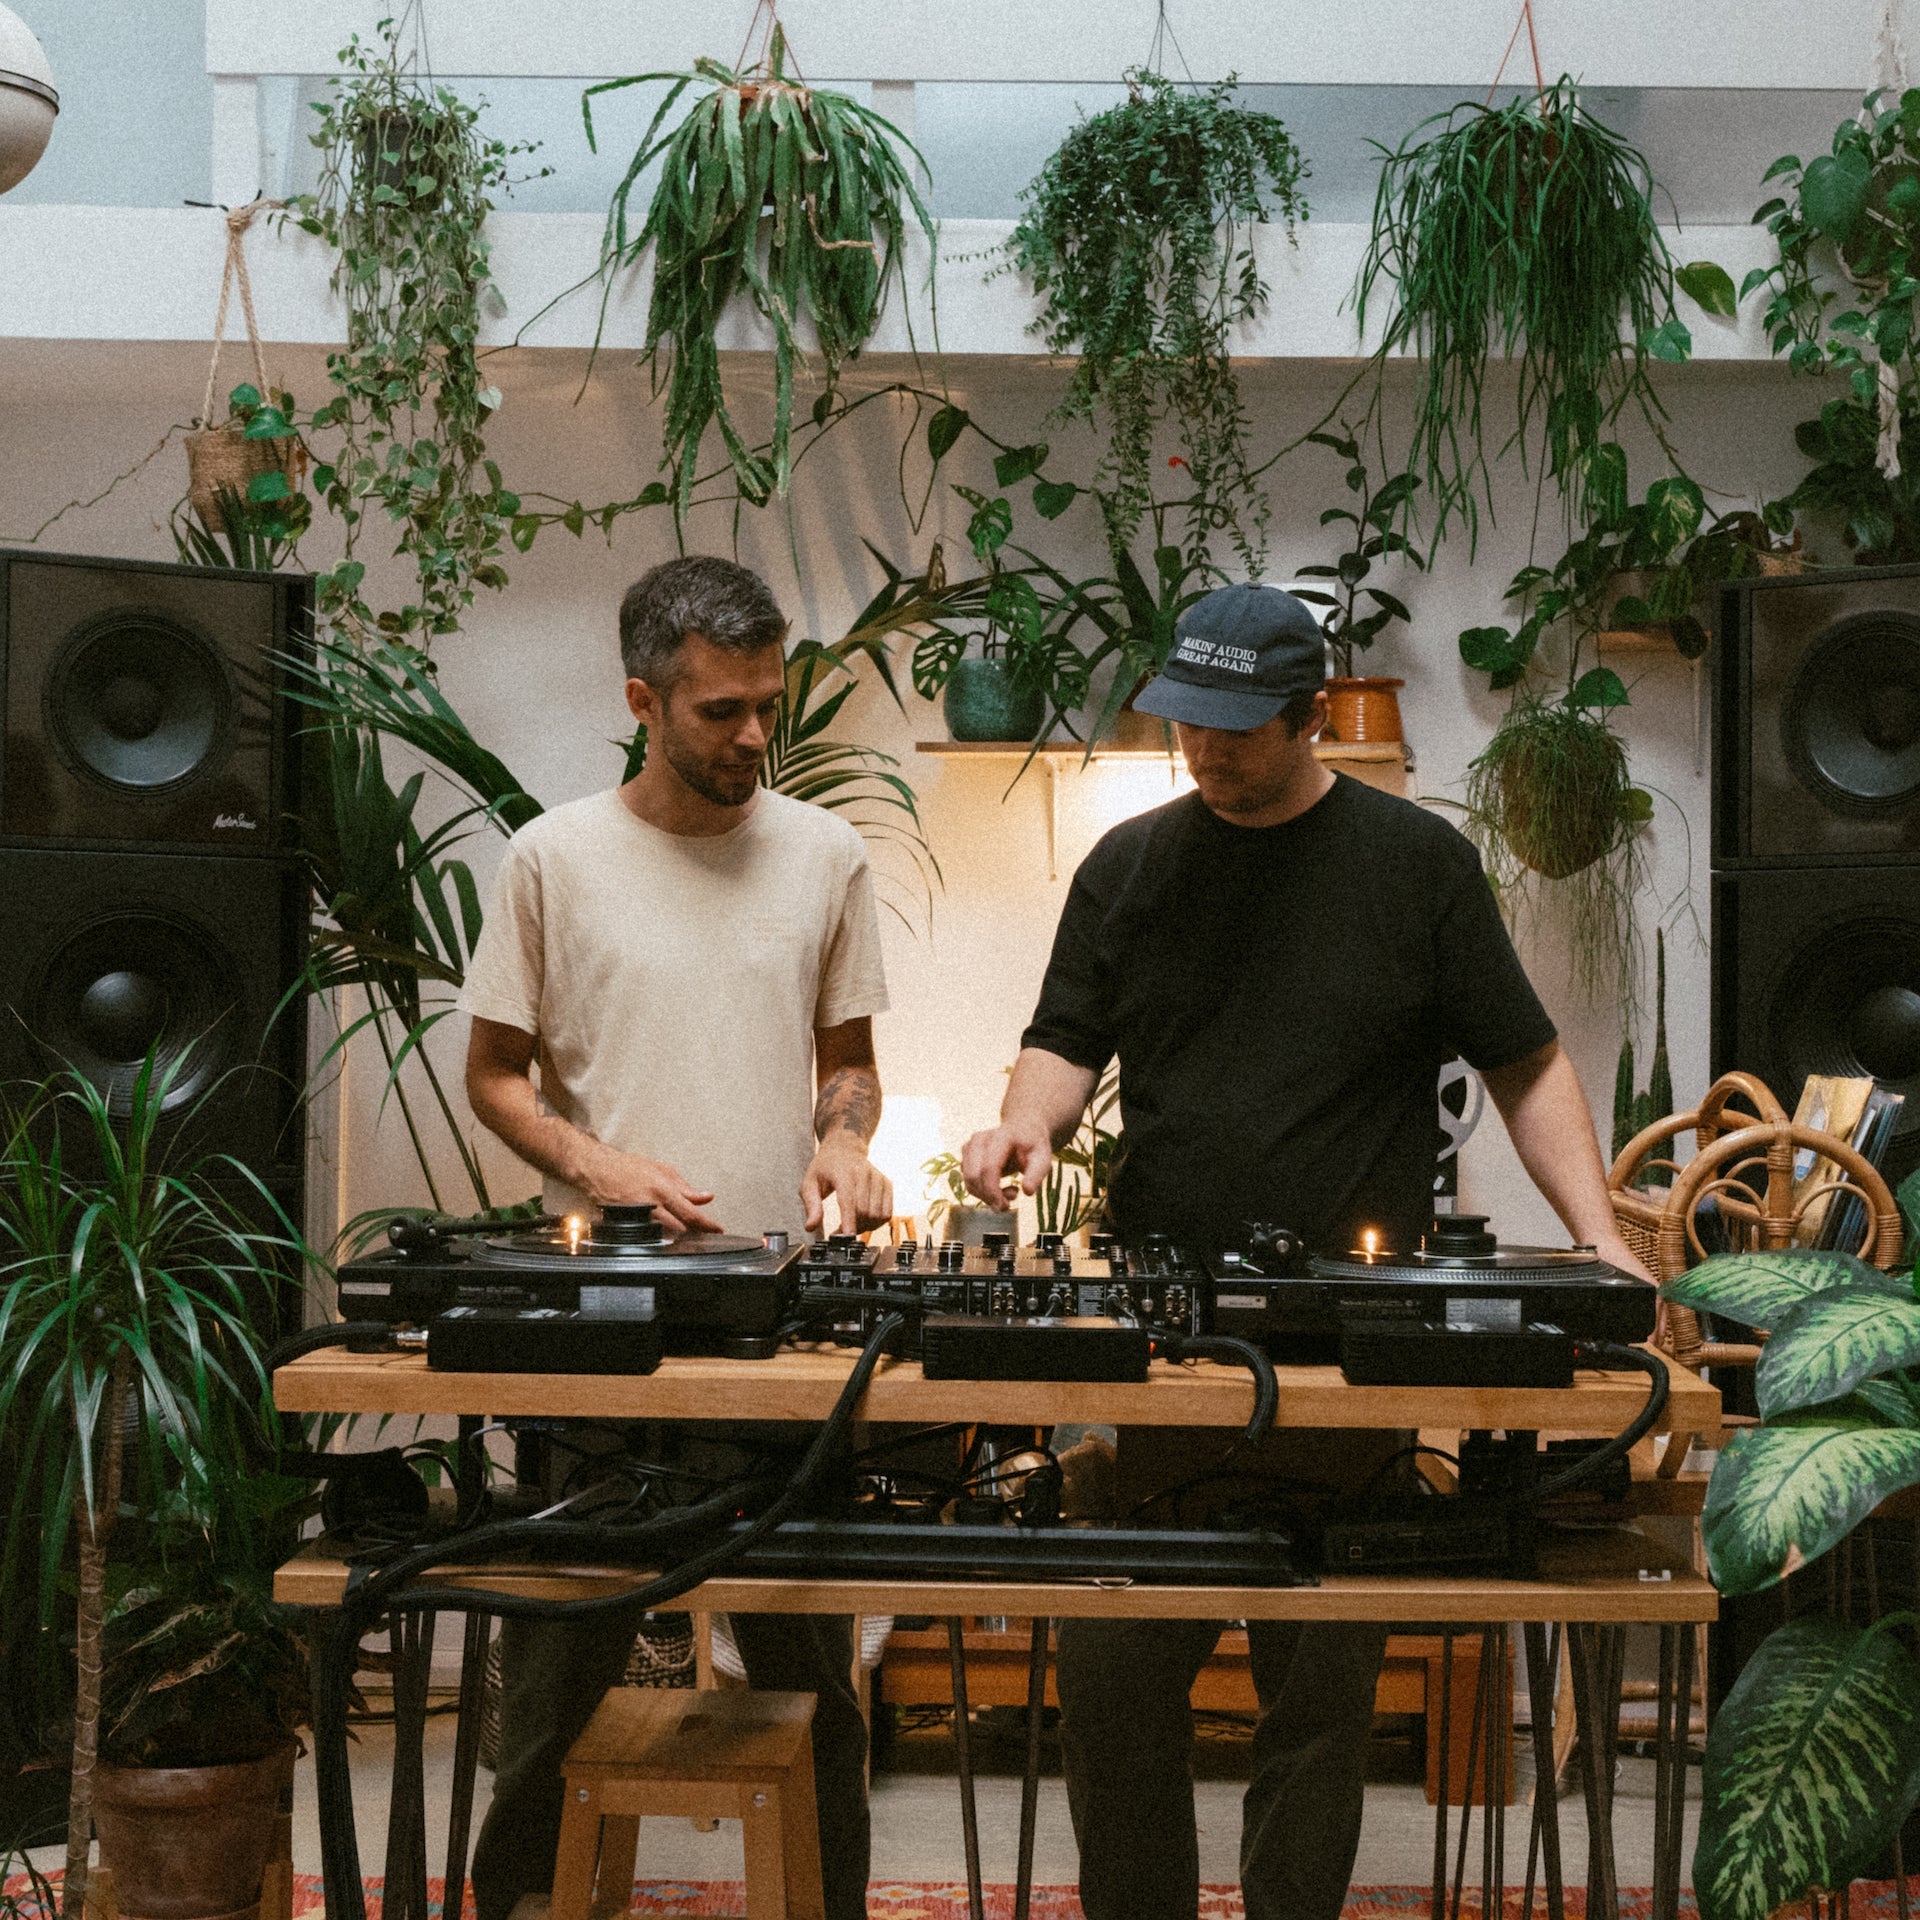 Interview: My Analog Journal x MasterSounds - MasterSounds